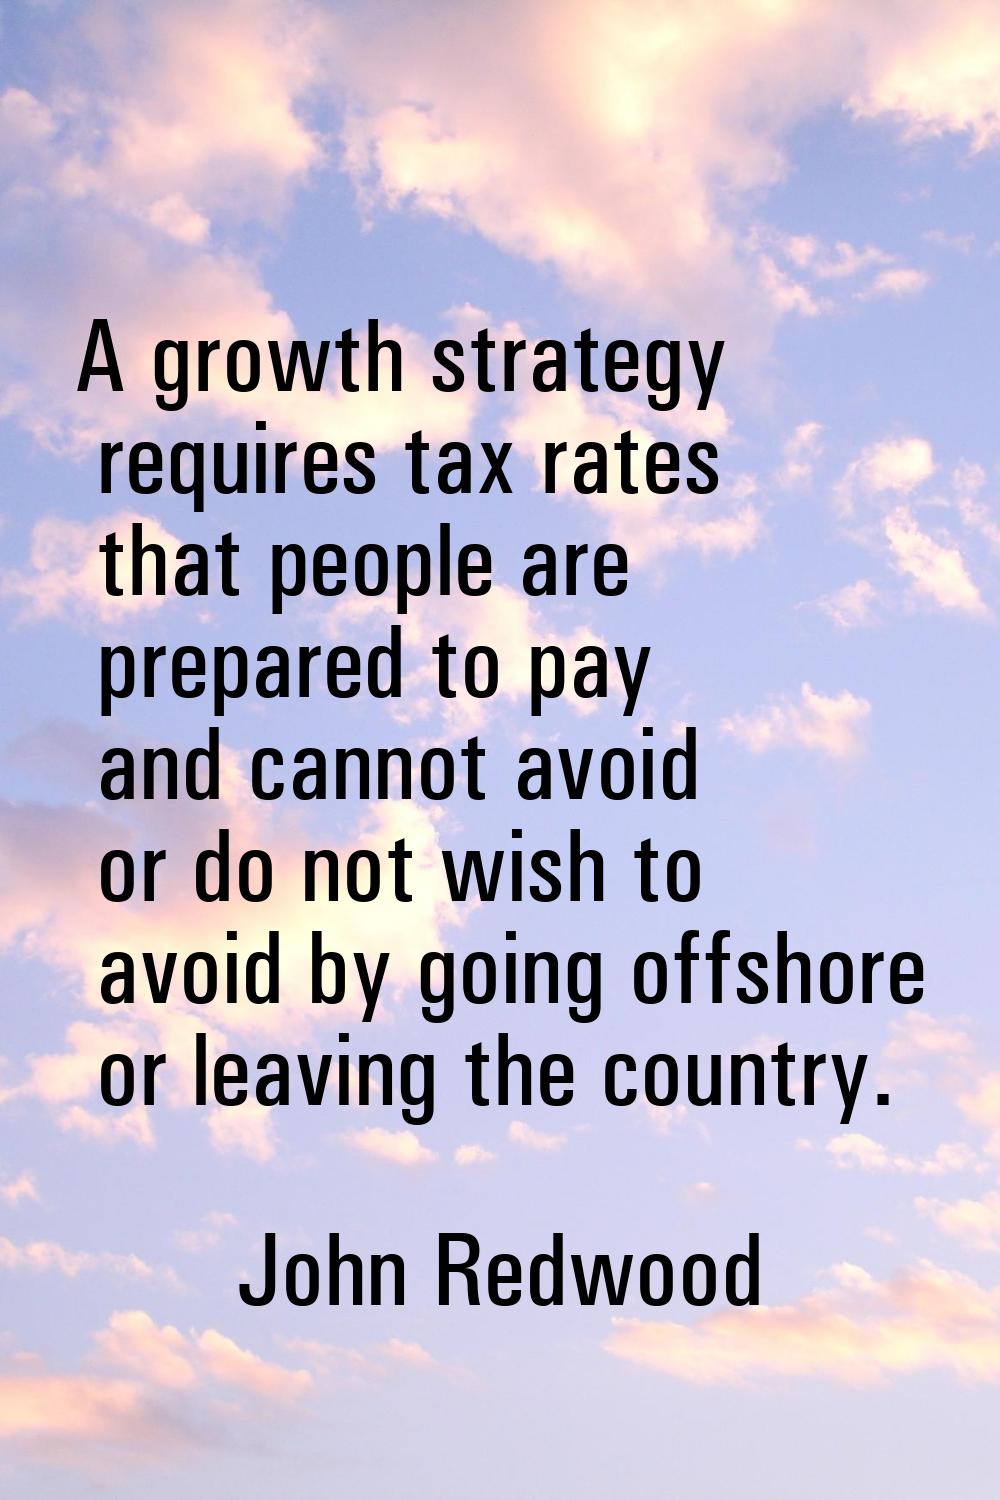 A growth strategy requires tax rates that people are prepared to pay and cannot avoid or do not wis